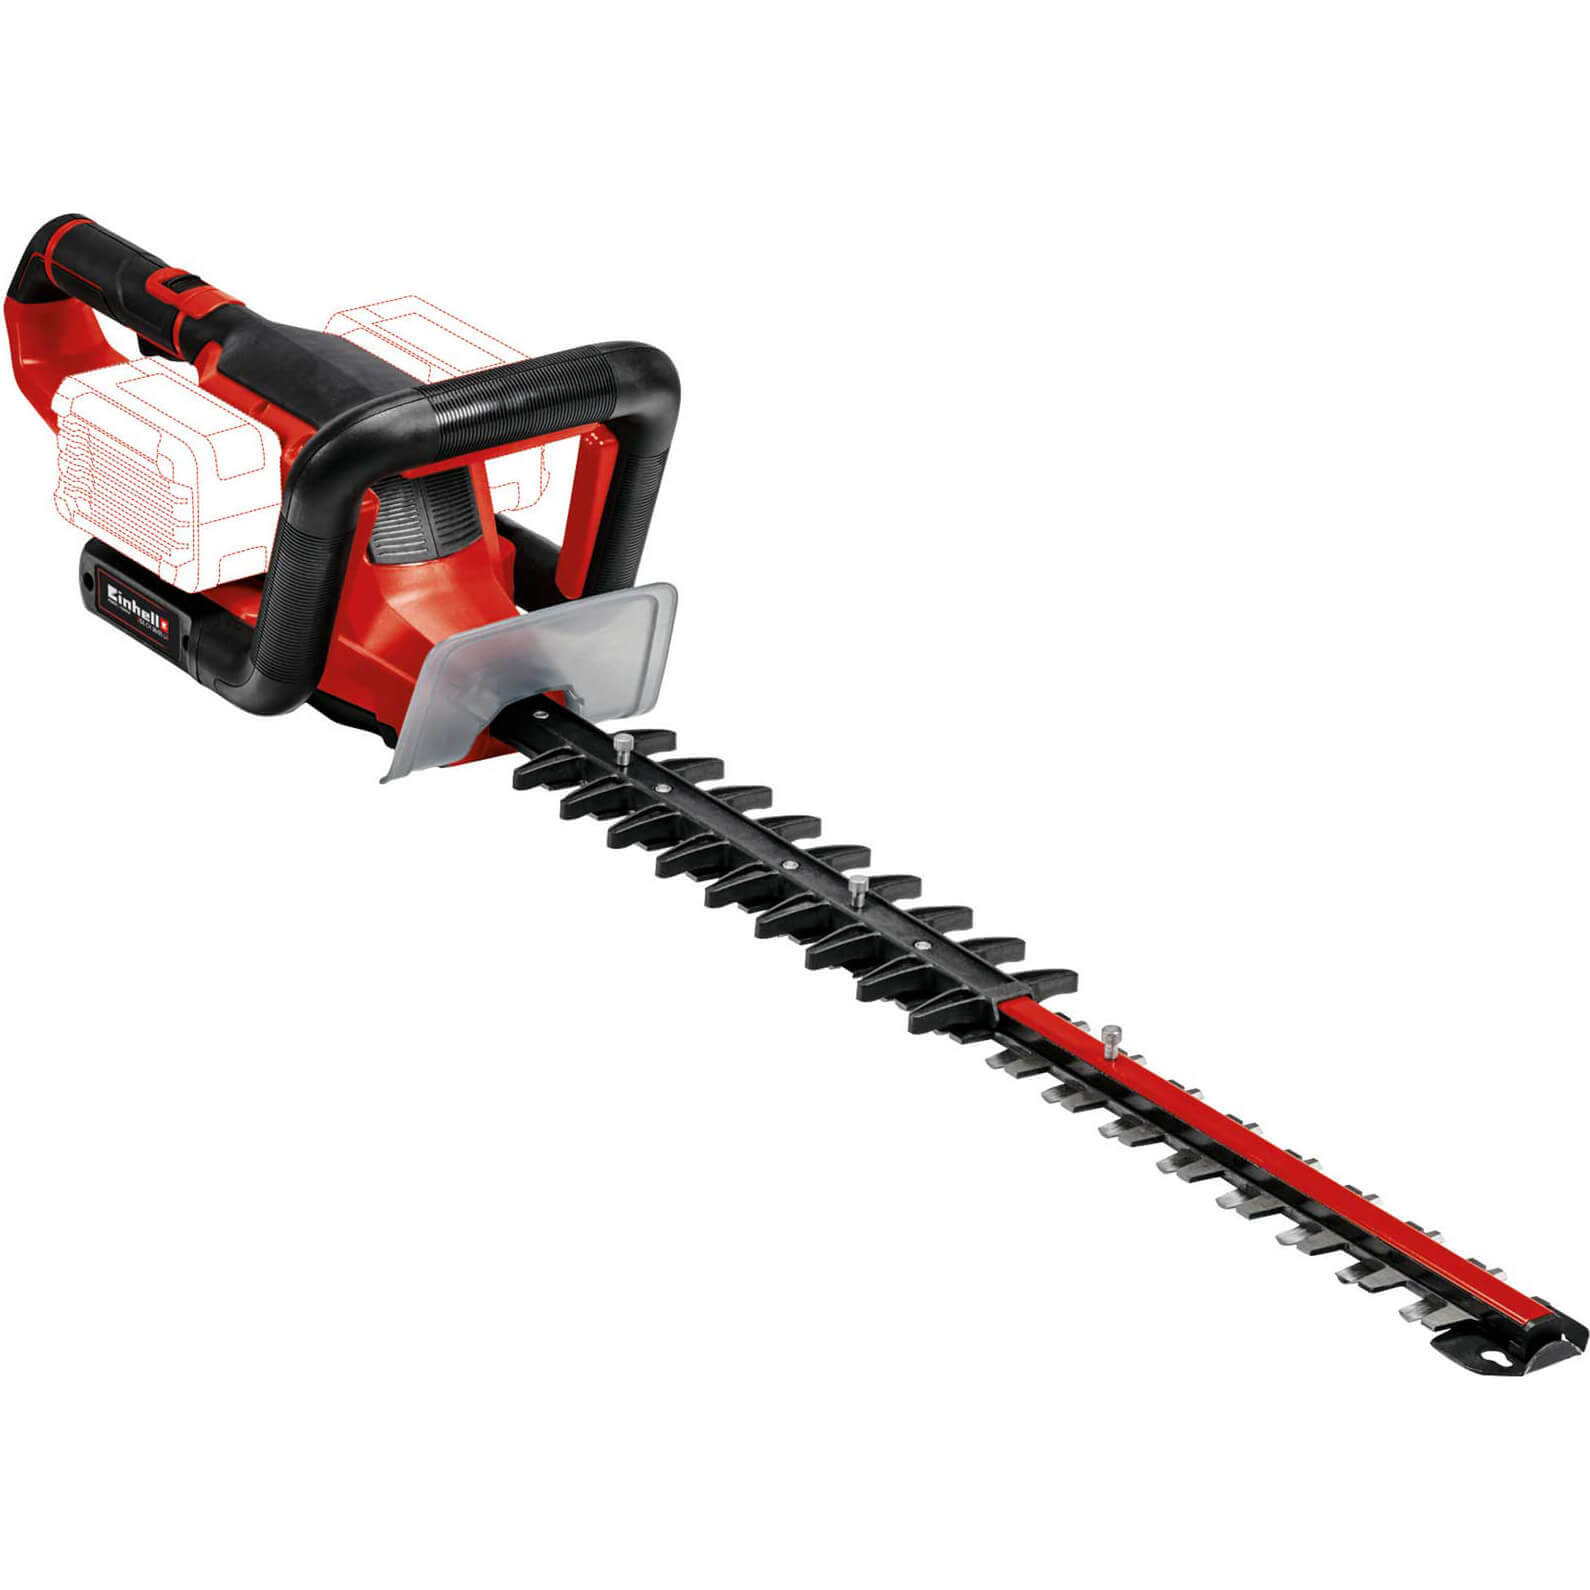 Image of Einhell GE-CH 36/65 Li 36v Cordless Hedge Trimmer 650mm No Batteries No Charger